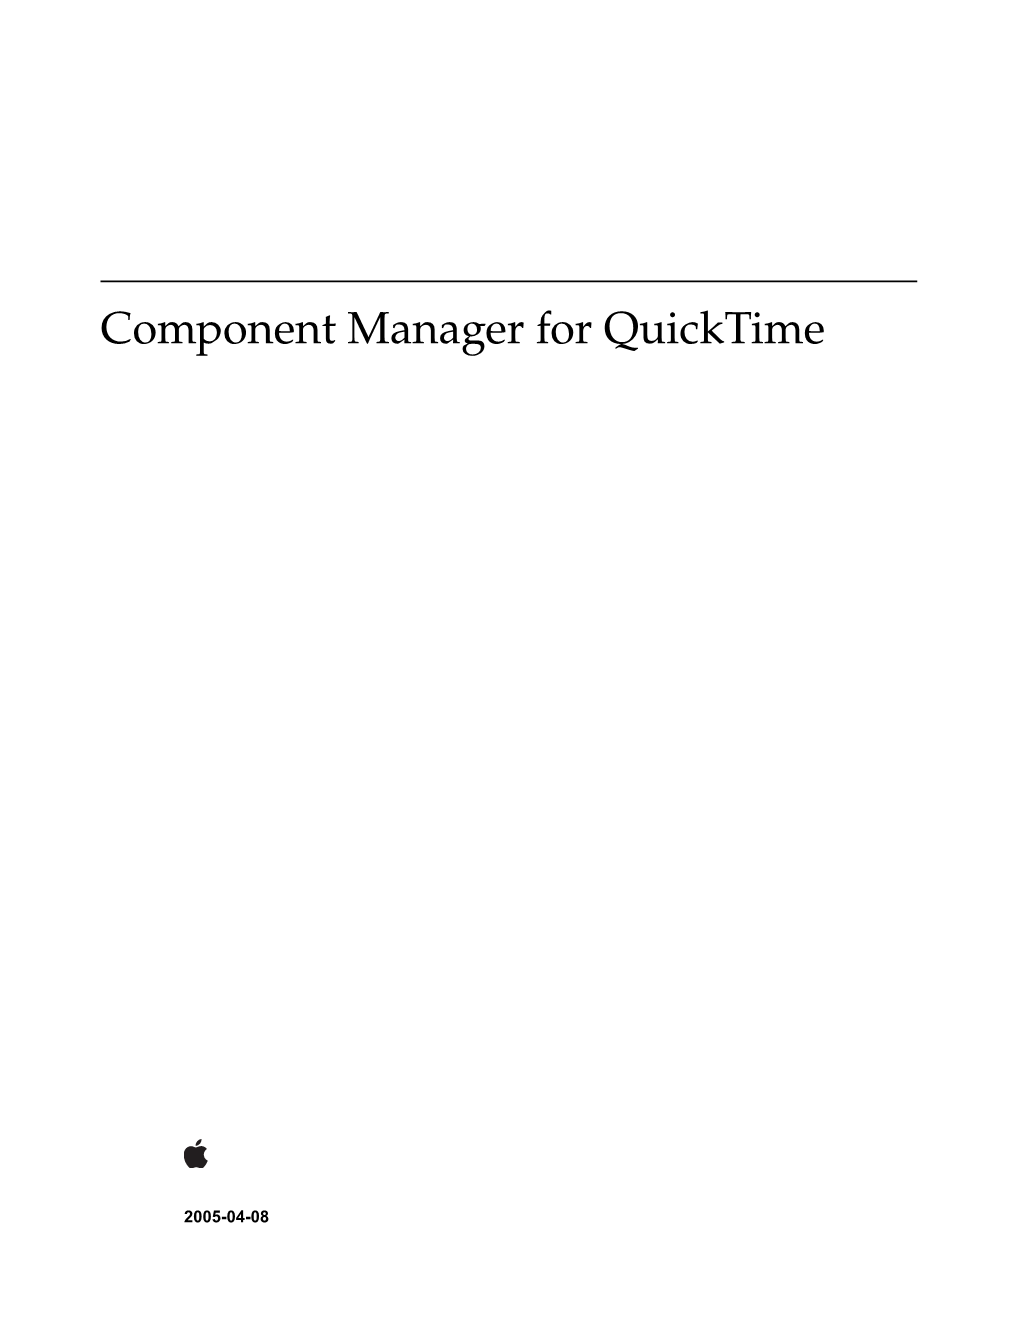 Component Manager for Quicktime